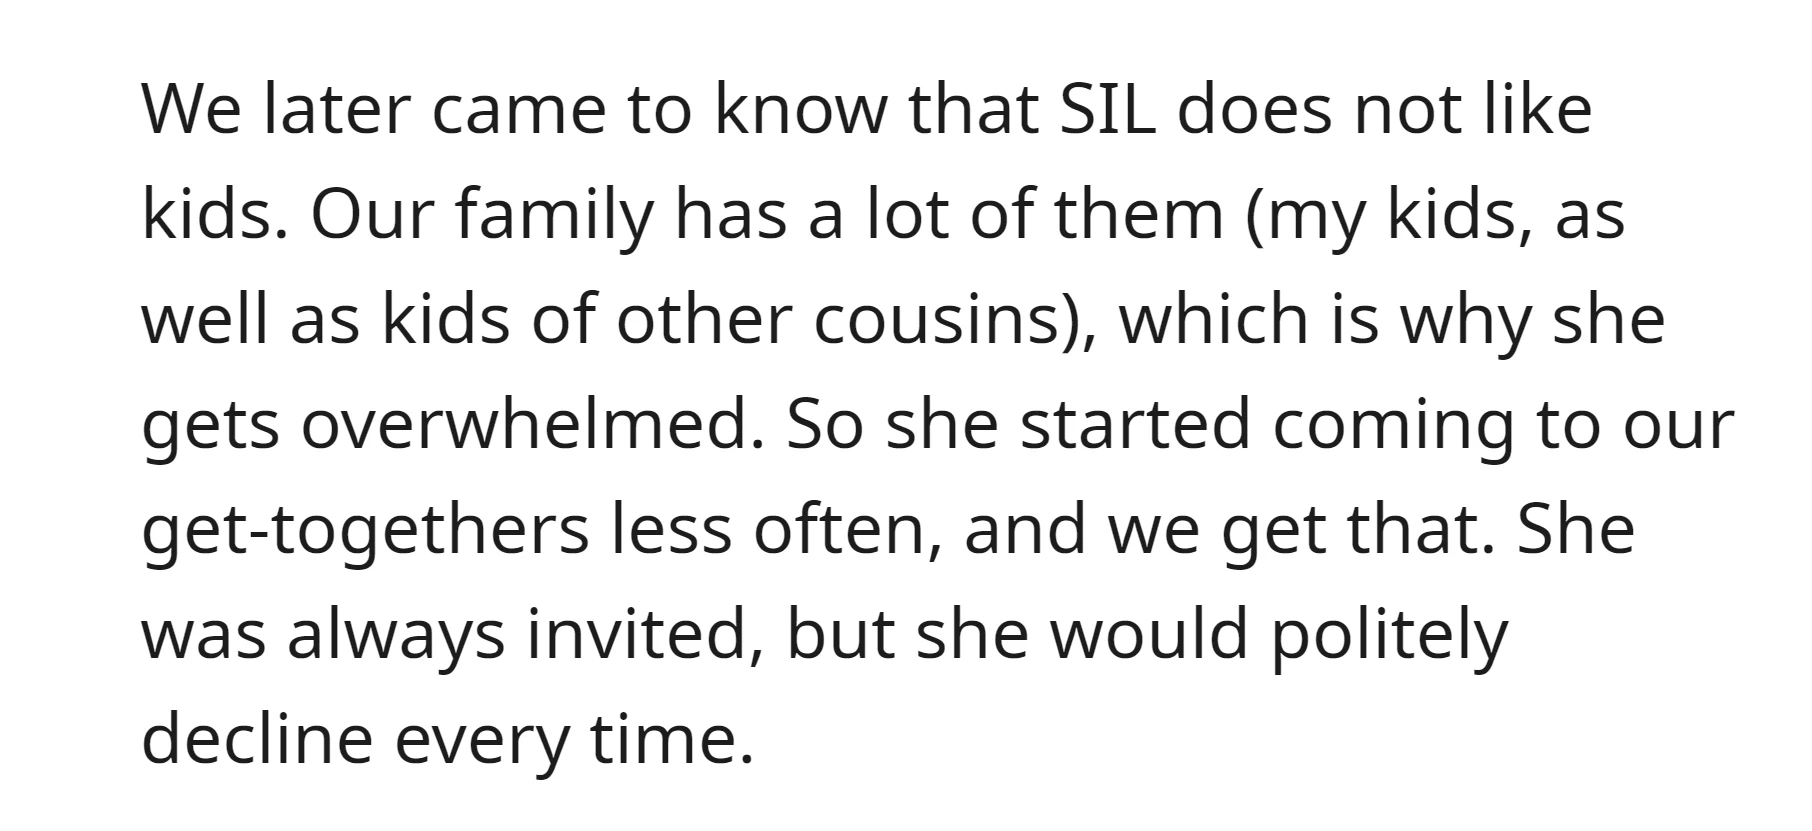 SIL doesn't enjoy being around kids, so she attends family gatherings less frequently